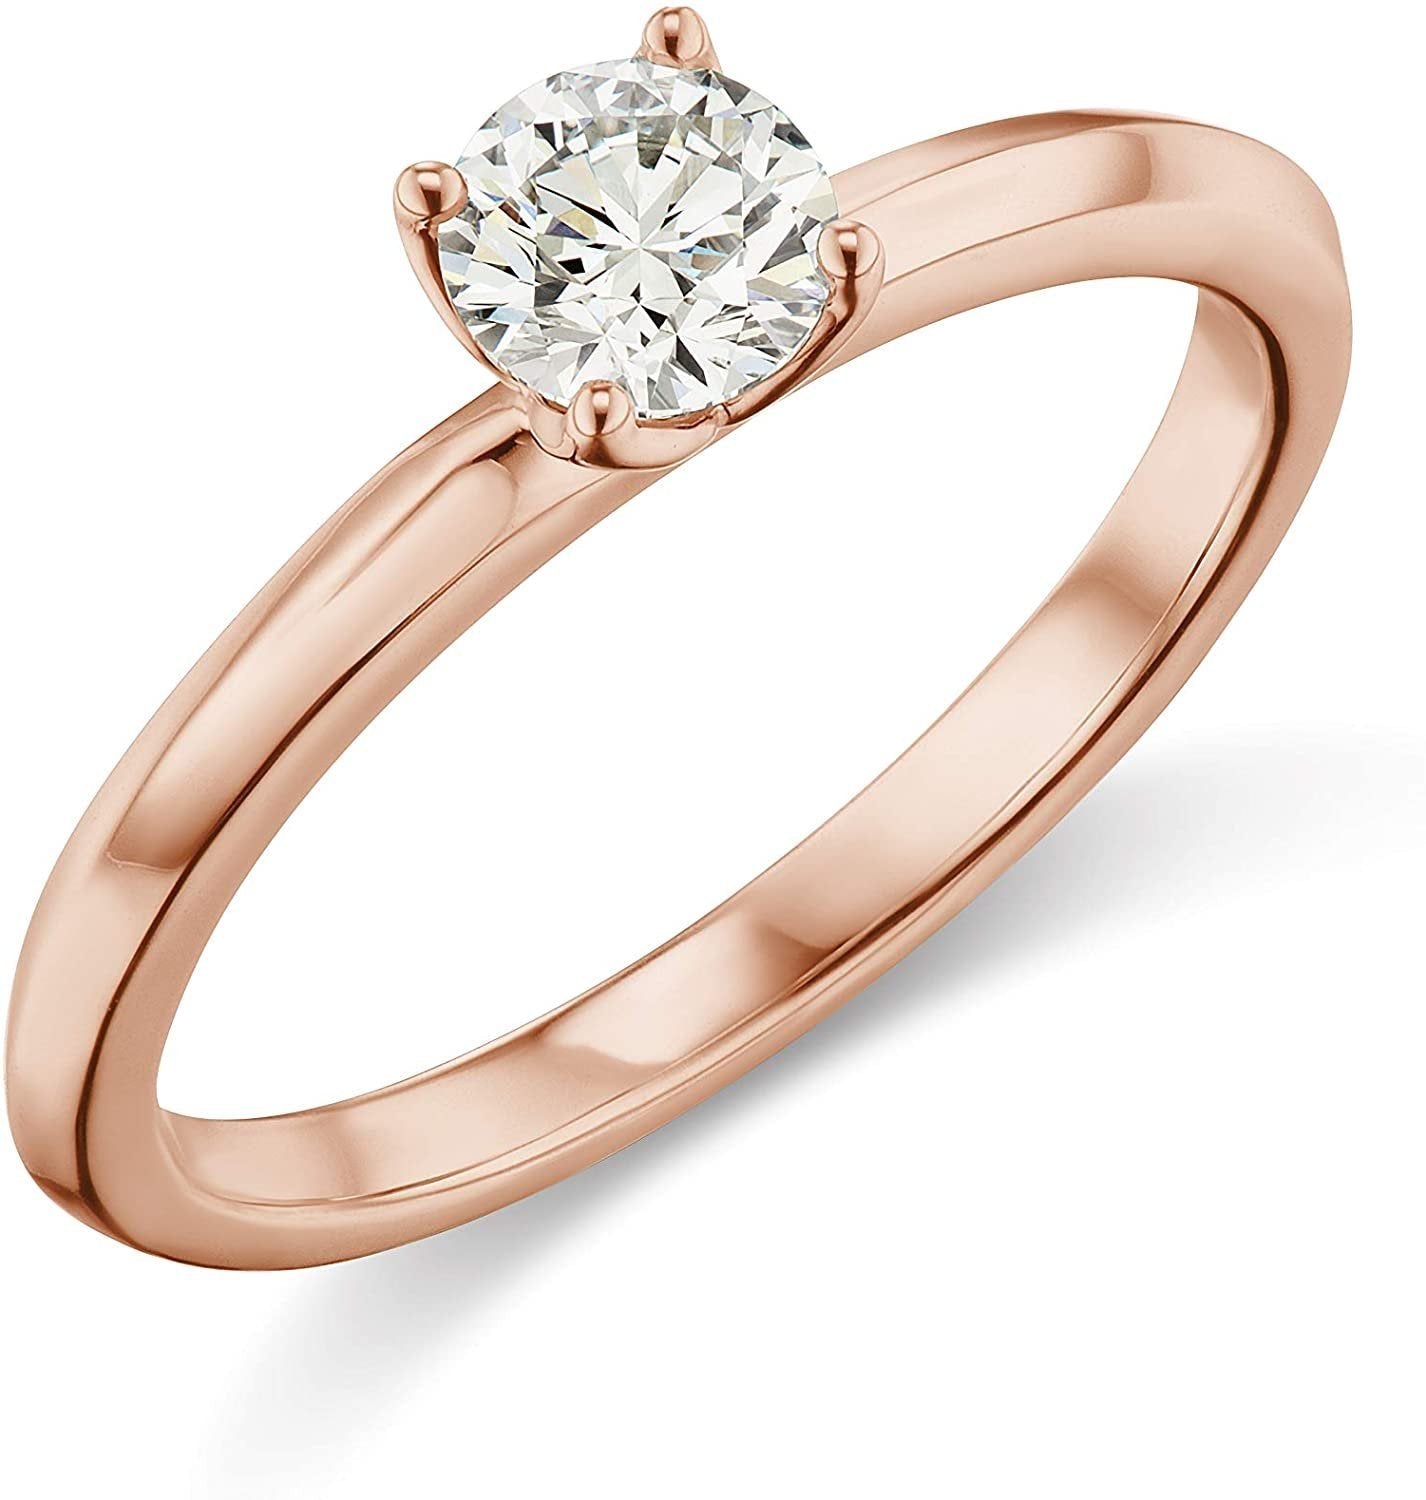 IGI Certified 2.0 Carat Round Brilliant-Cut Lab Created Diamond 14K Gold Classic 4-Prong Solitaire Engagement Ring (G-H Color, VS1-VS2 Clarity) - 14K Rose Gold, Size 7-1/4